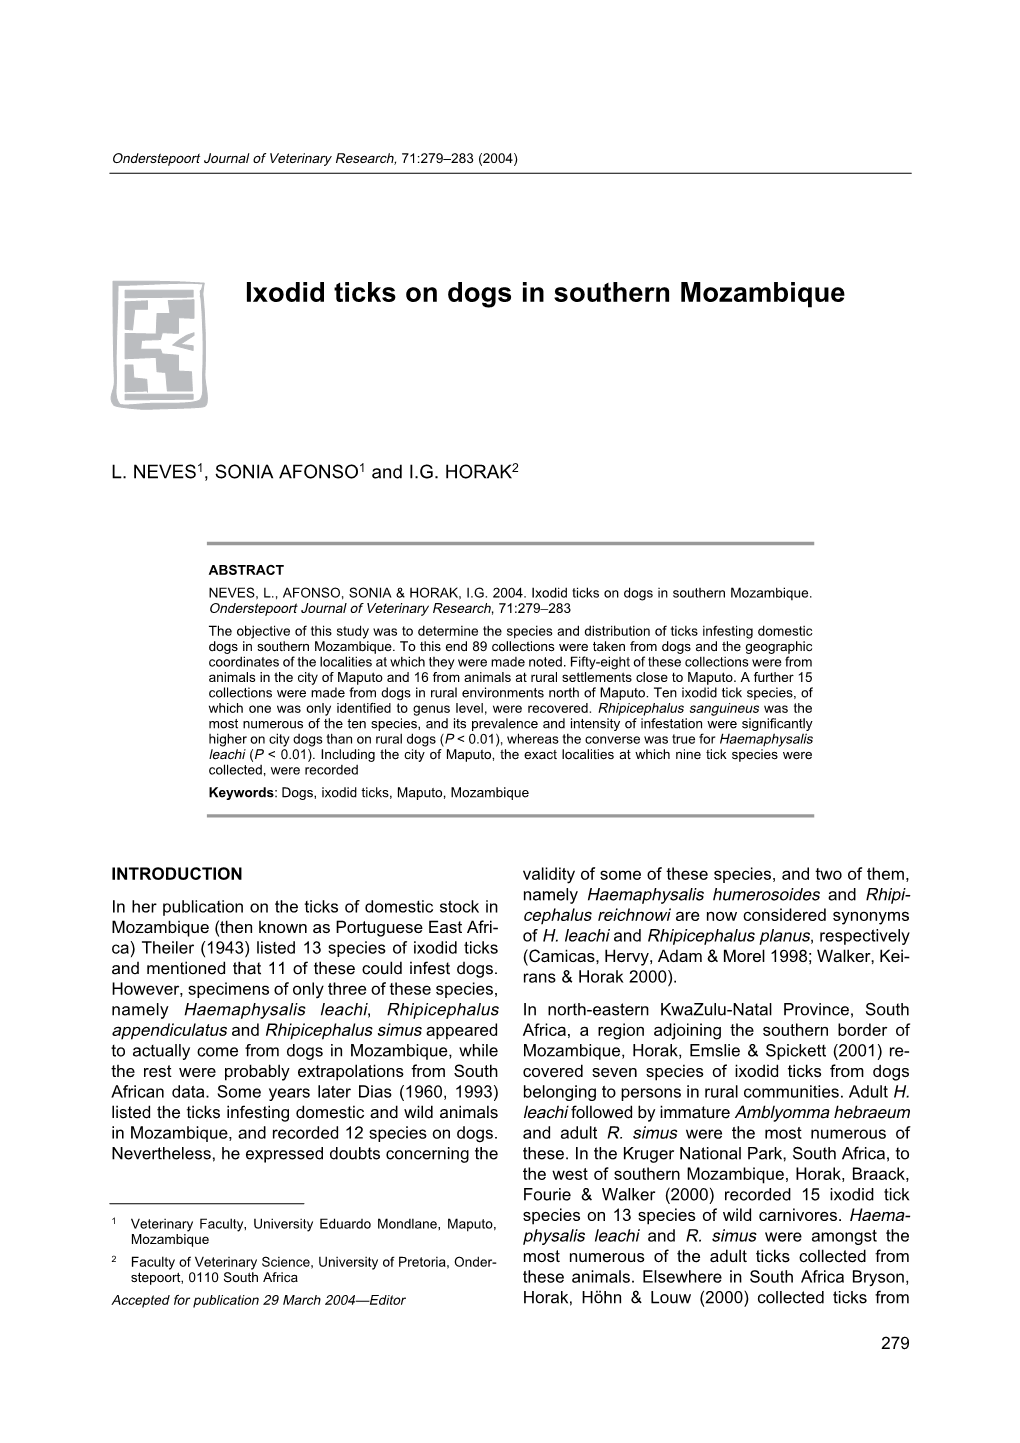 Ixodid Ticks on Dogs in Southern Mozambique